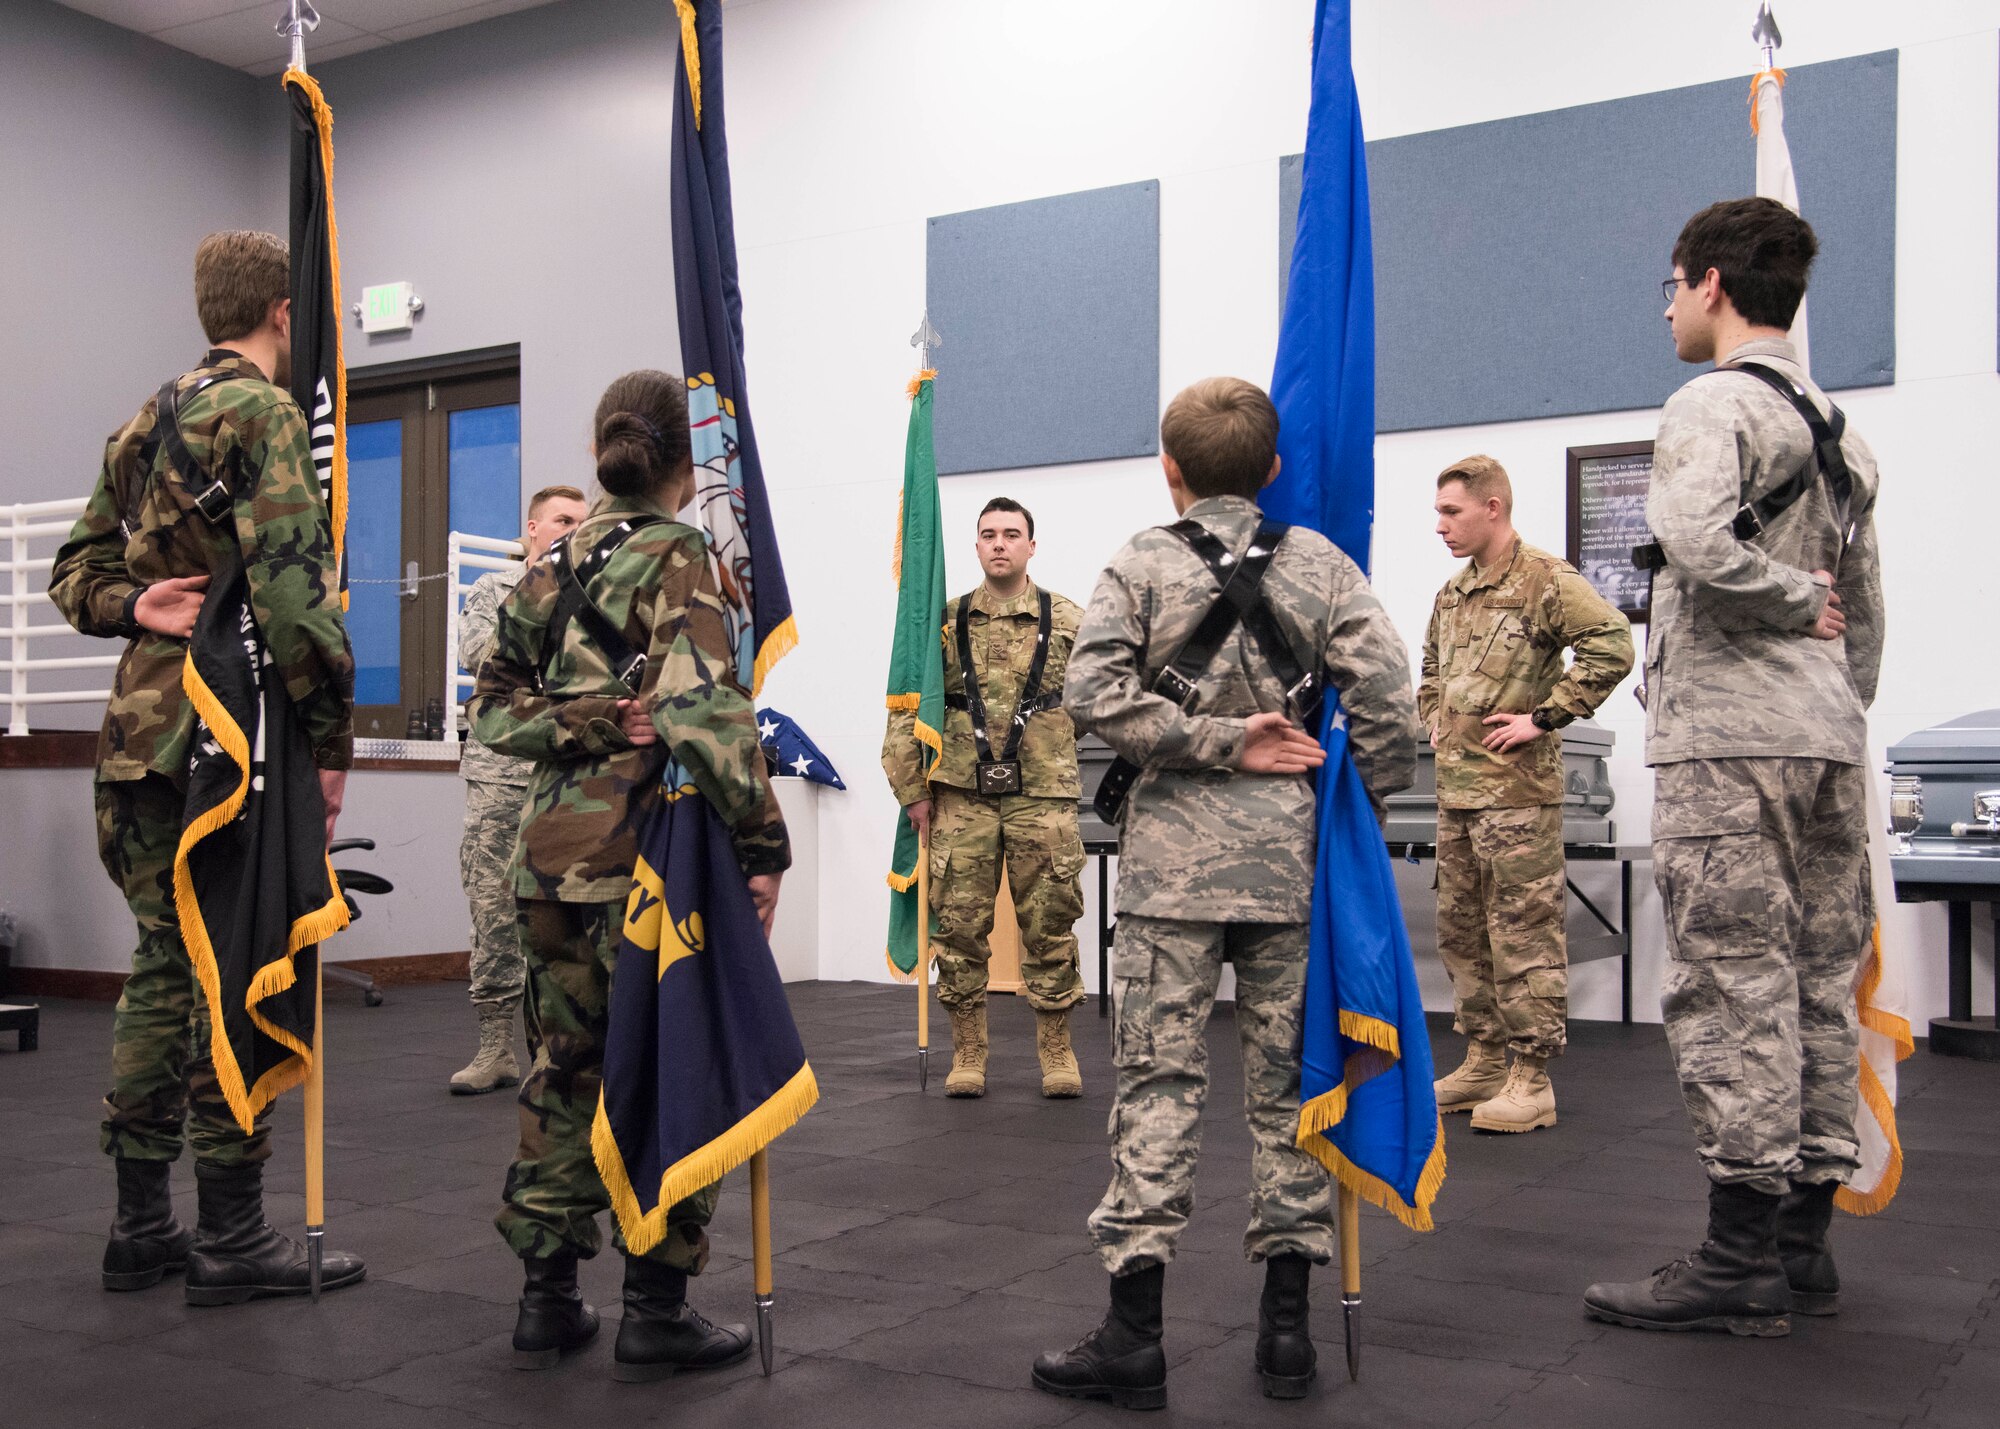 Team Fairchild Honor Guardsmen help four Civil Air Patrol Spokane Composite Squadron cadets train with flags at Fairchild Air Force Base, Washington, Nov. 26, 2018. CAP is a volunteer organization that performs three congressionally assigned key missions: emergency services, disaster relief operations and aerospace education for youth and the general public. (U.S. Air Force photo by Senior Airman Ryan Lackey)